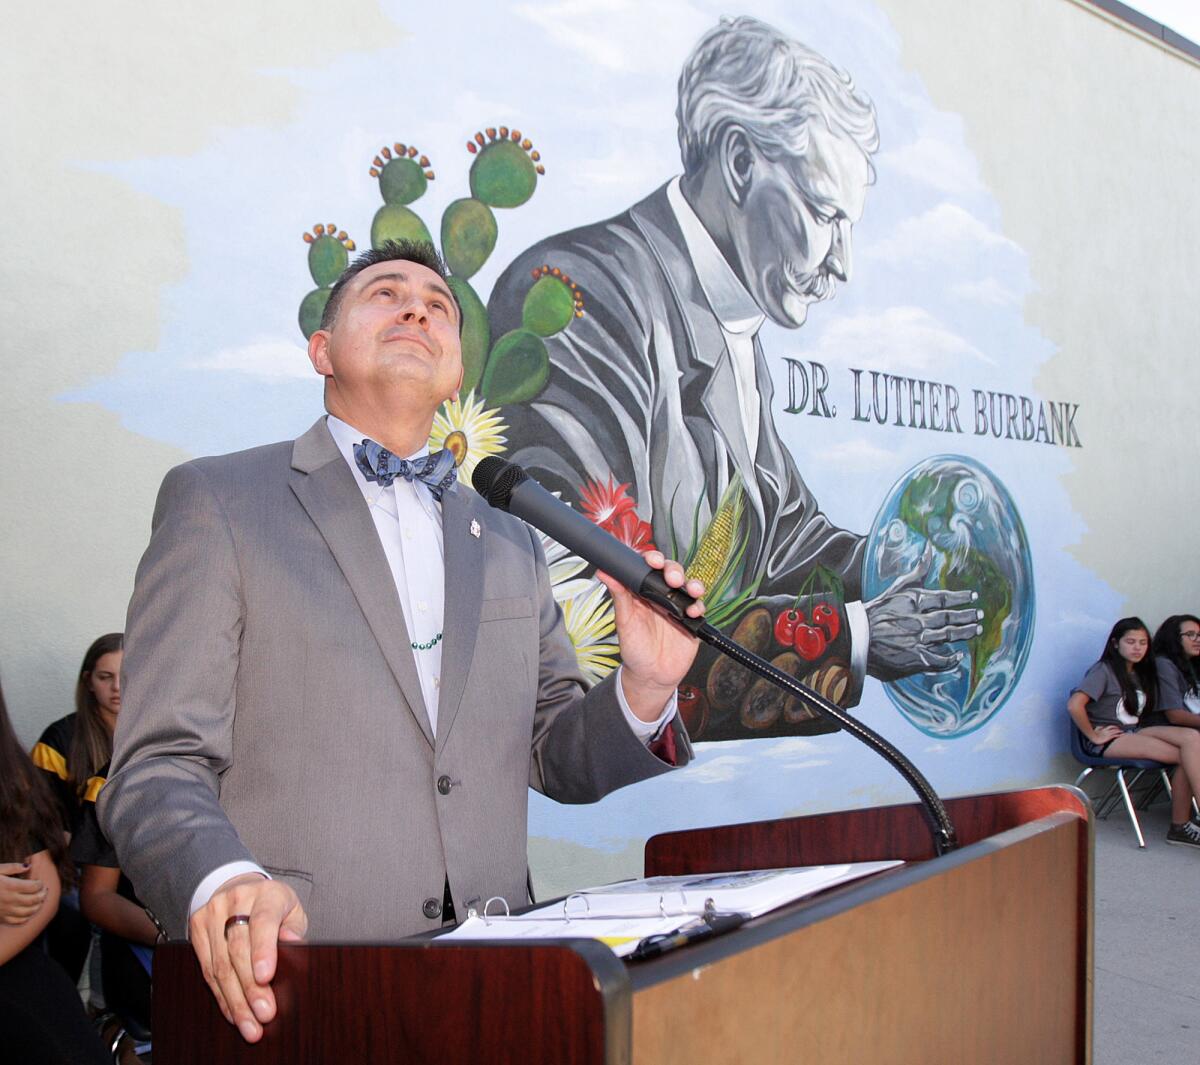 Luther Burbank Middle School Principal Oscar Macias takes the podium to close the ceremony as a jet, taking off from the Bob Hope Airport, flies overhead during the mural dedication and ribbon-cutting ceremony at the school on Tuesday, March 15, 2016. The mural depicts Dr. Luther Burbank and features about his life.